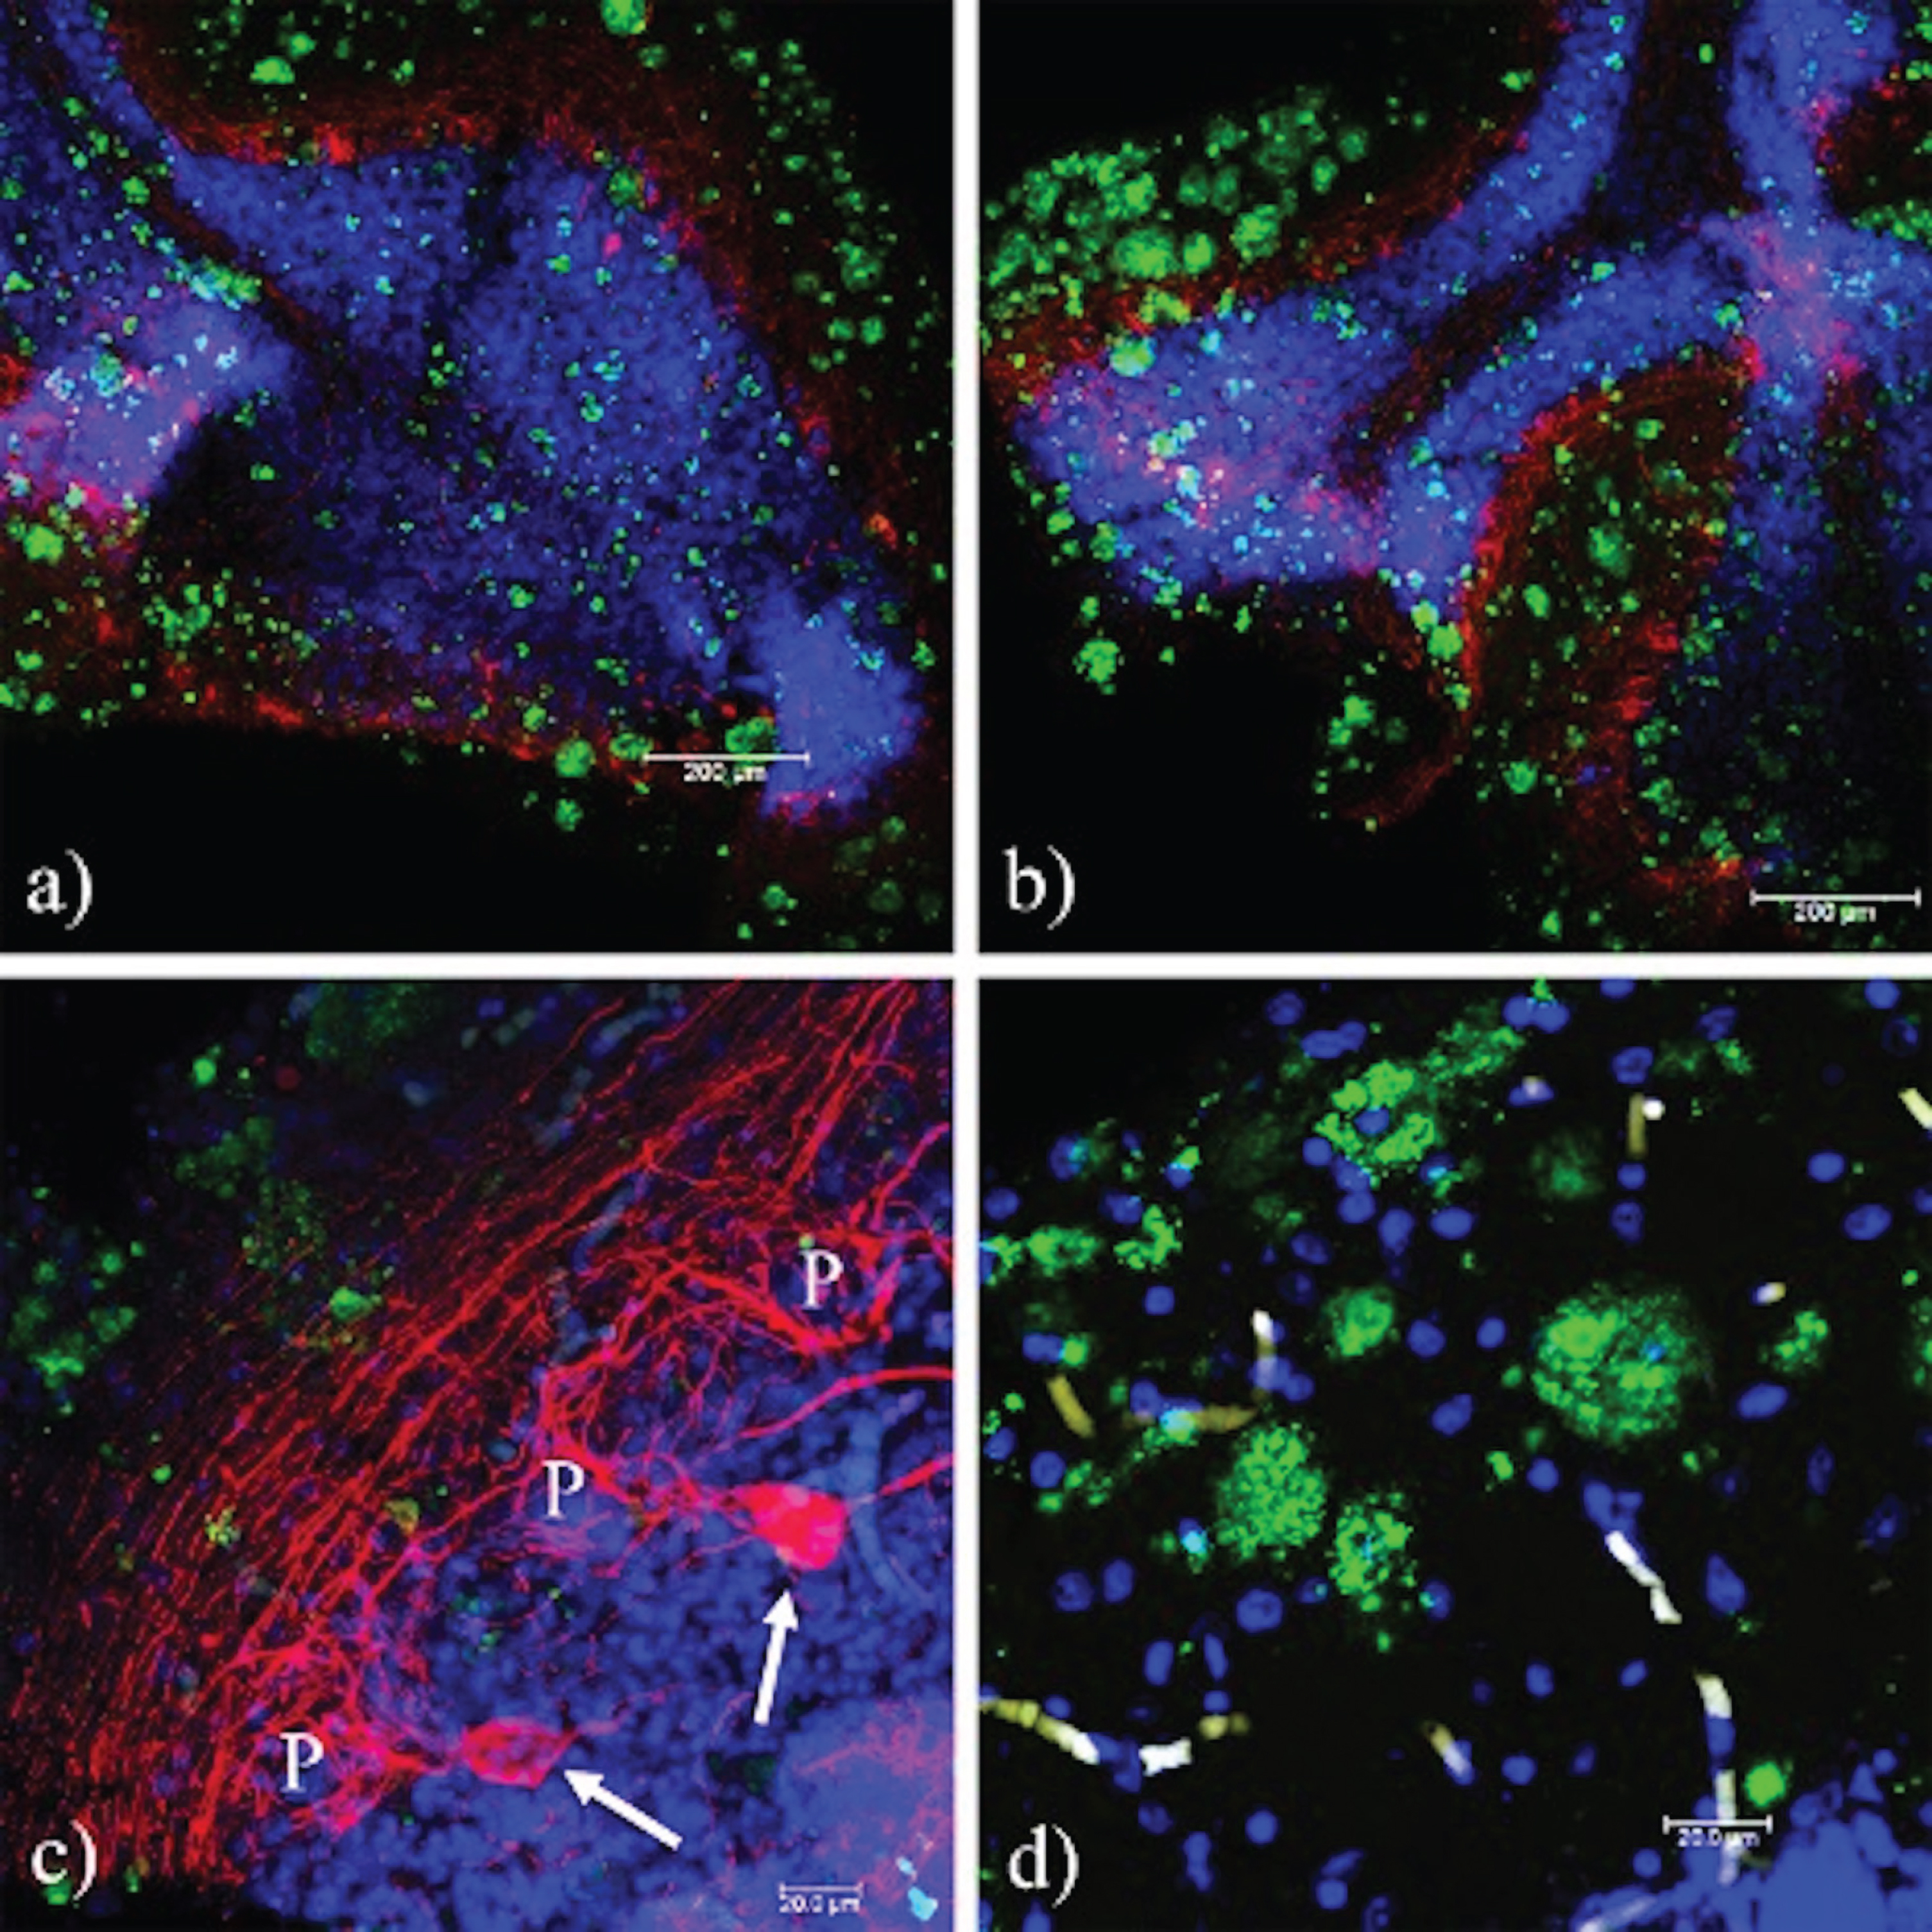 Phosphorylated tau in the cerebellum. In a) and b) pT231 reactivity (red) demonstrates phosphorylation of tau at Thr-231 in both external and internal folia, respectively. Aggregated PrPSc (green) and nuclei (blue) are shown. c) Parallel fibers stained with pT231 in the ML. d) No reactivity is observed with the pT396 antibody. In the magnification of b), axons of the Purkinje cells recognized with the pT231 antibody are indicated. ML, molecular layer; Wm, white matter; P, Purkinje cells. Images obtained with the Leica SP8 confocal microscope.